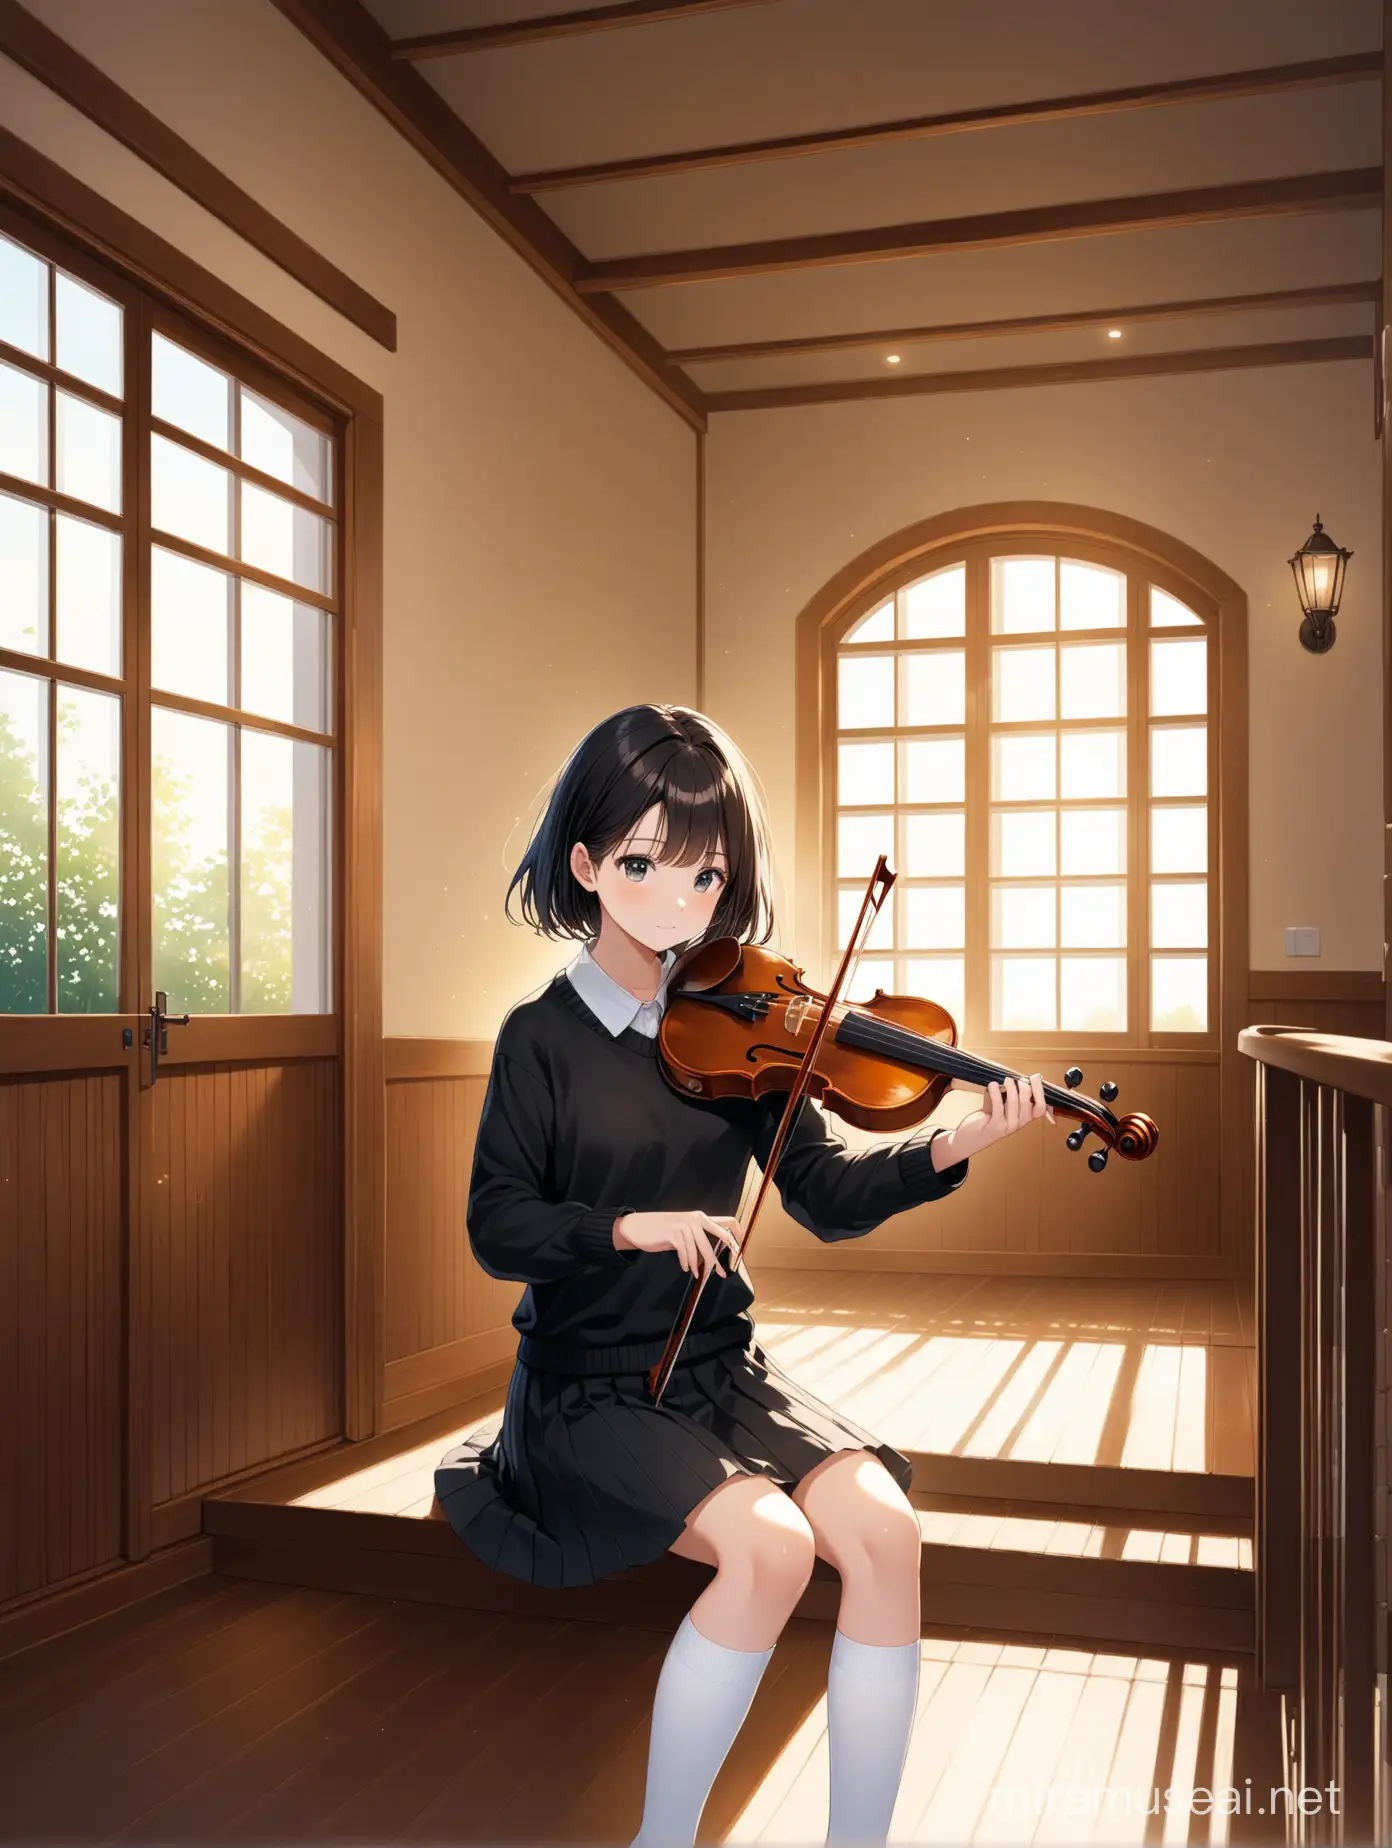 A girl wearing a white shirt with a black sweater over it, her hair is short, black, her eyes are big, she is wearing a black skirt with stripes, white shoes, and long white socks. She is sitting in the foyer of a large house and playing the violin. In the background, a wooden staircase appears, and the wooden decoration and furnishings of the house appear, and light enters from a window.